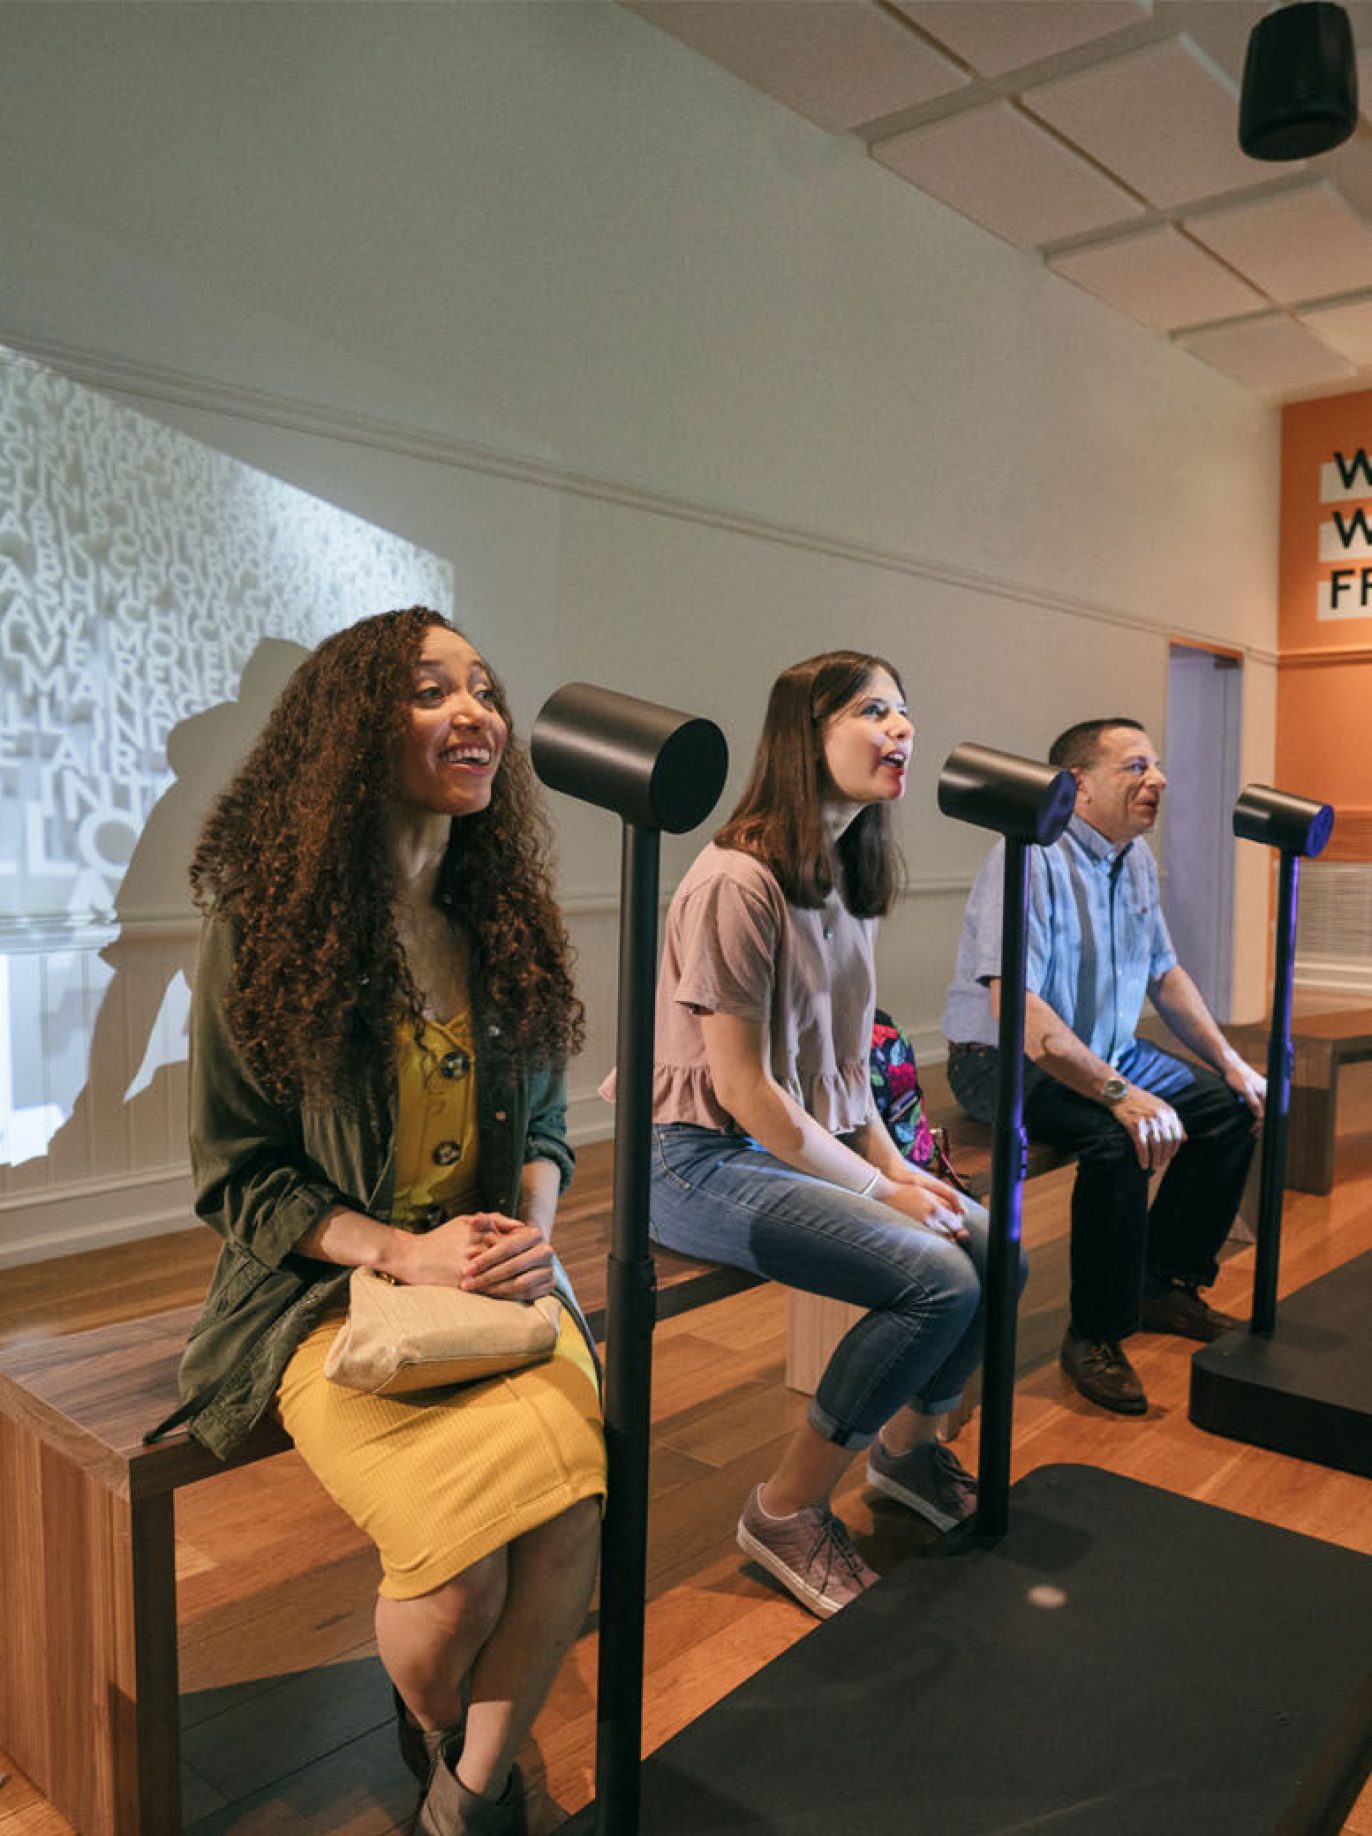 Voice-activated exhibits include “Where Do Words Come From,” a 22-foot-tall talking word wall, an acoustically-sealed room where visitors use a teleprompter to deliver their own versions of historic speeches and a karaoke lounge. (Courtesy DuHon Photography/Long Story Short Media)